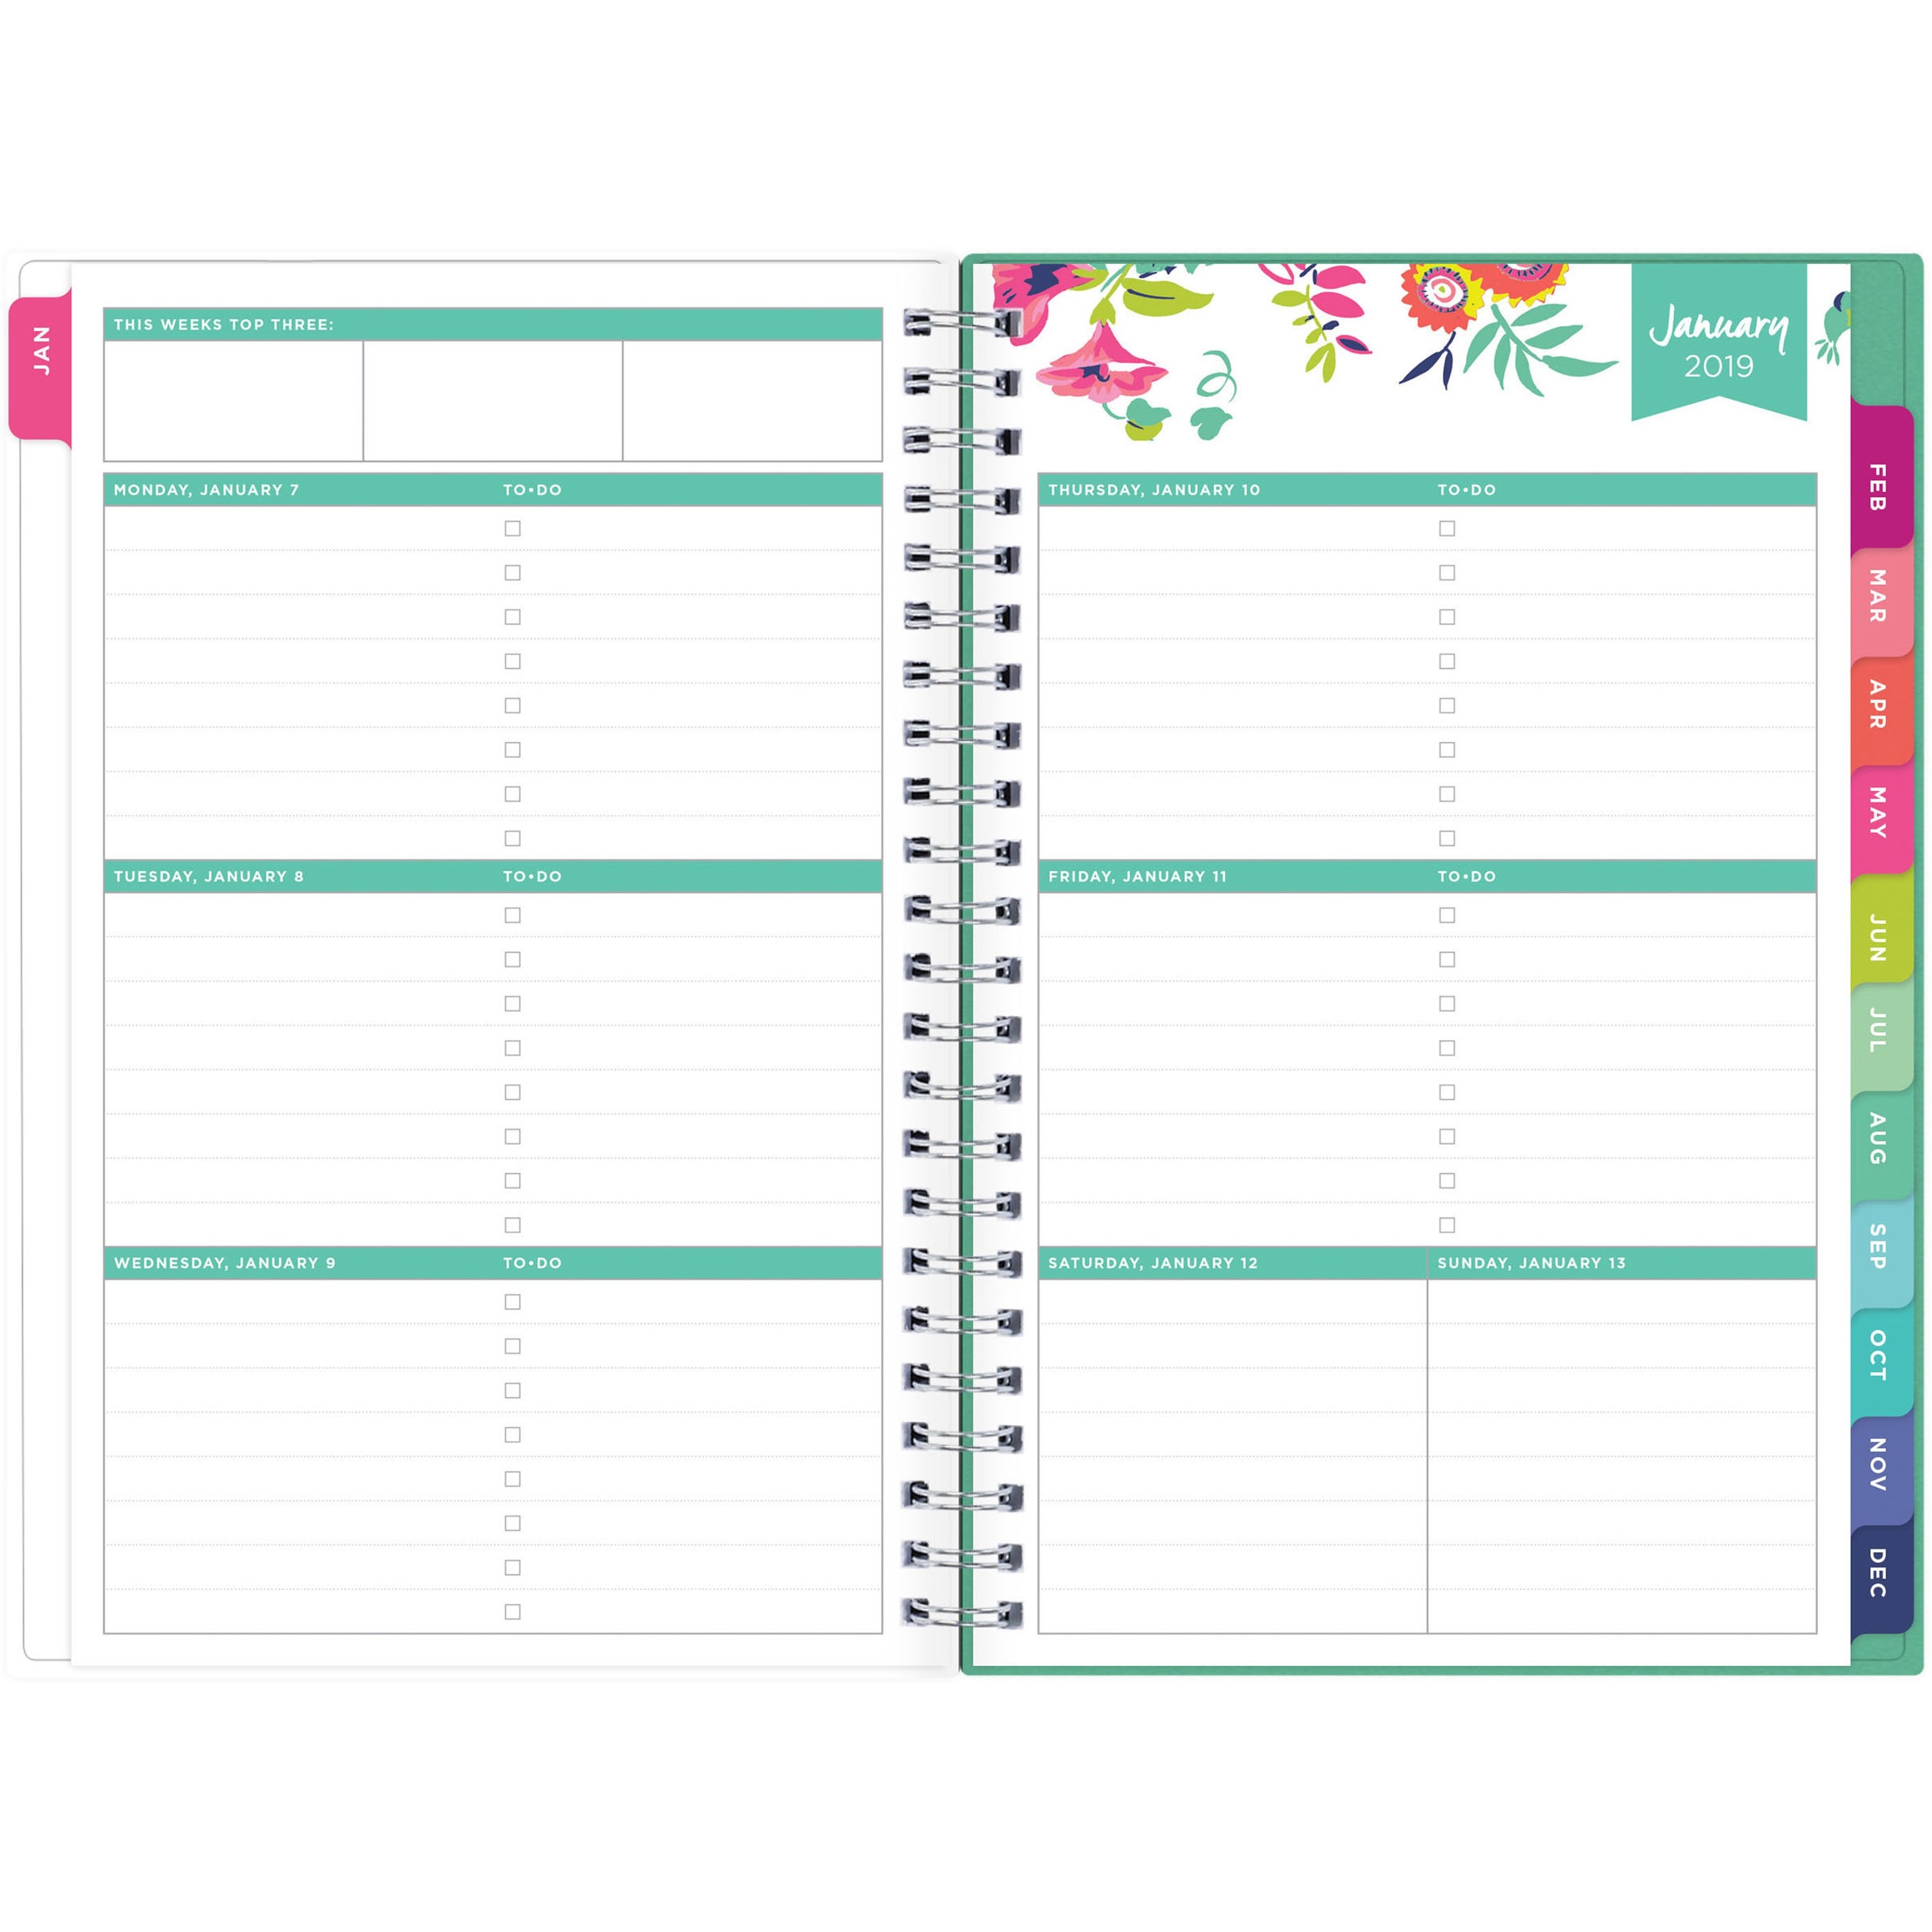 Day Designer For Blue Sky 2019 Weekly &amp; Monthly Planner, Twin-Wire Binding,  5&quot; X 8&quot;, Peyton White-5X8 Monthly Planner Calendar